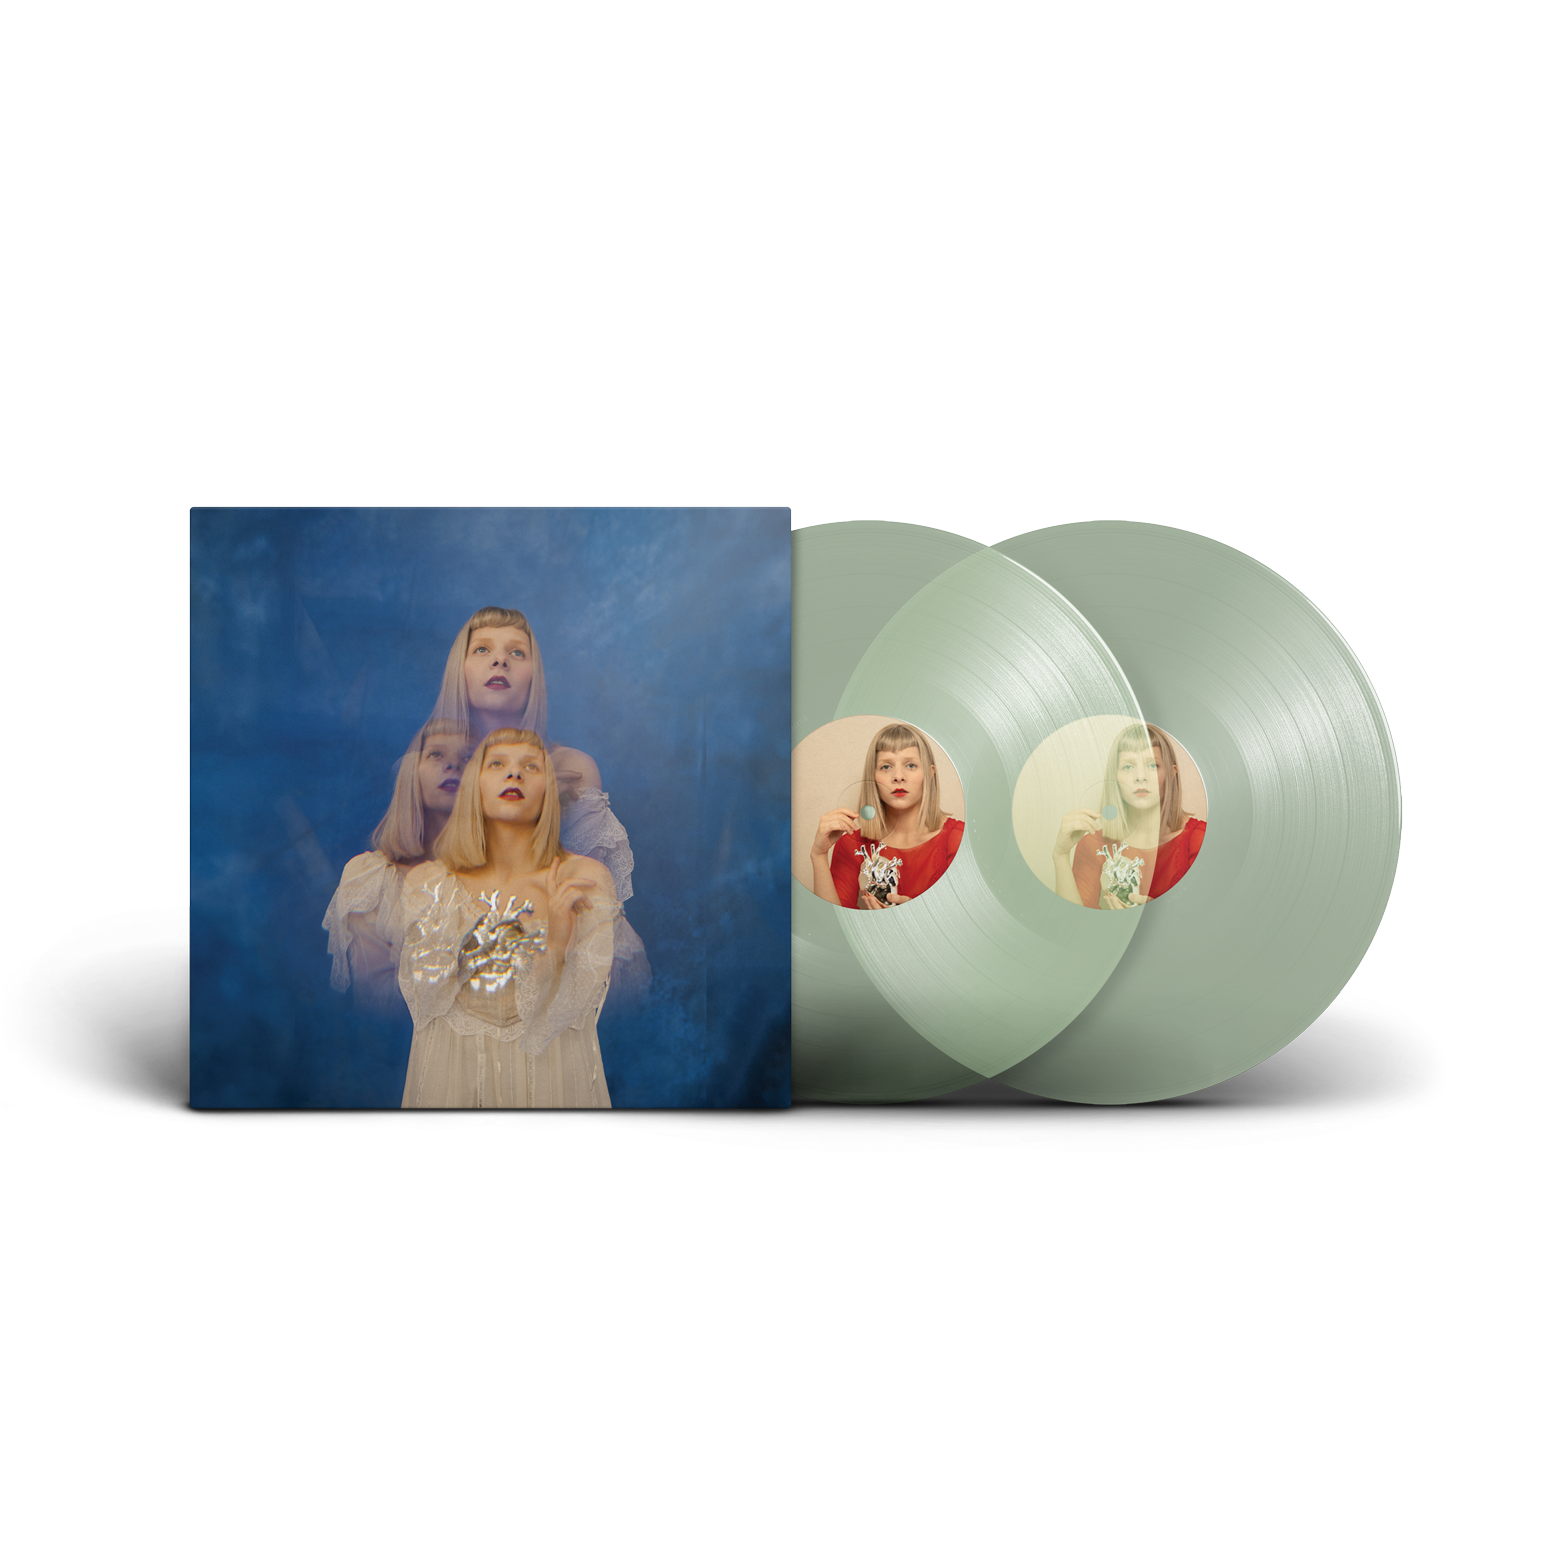 What Happened to the Heart? Collector's vinyl bundle